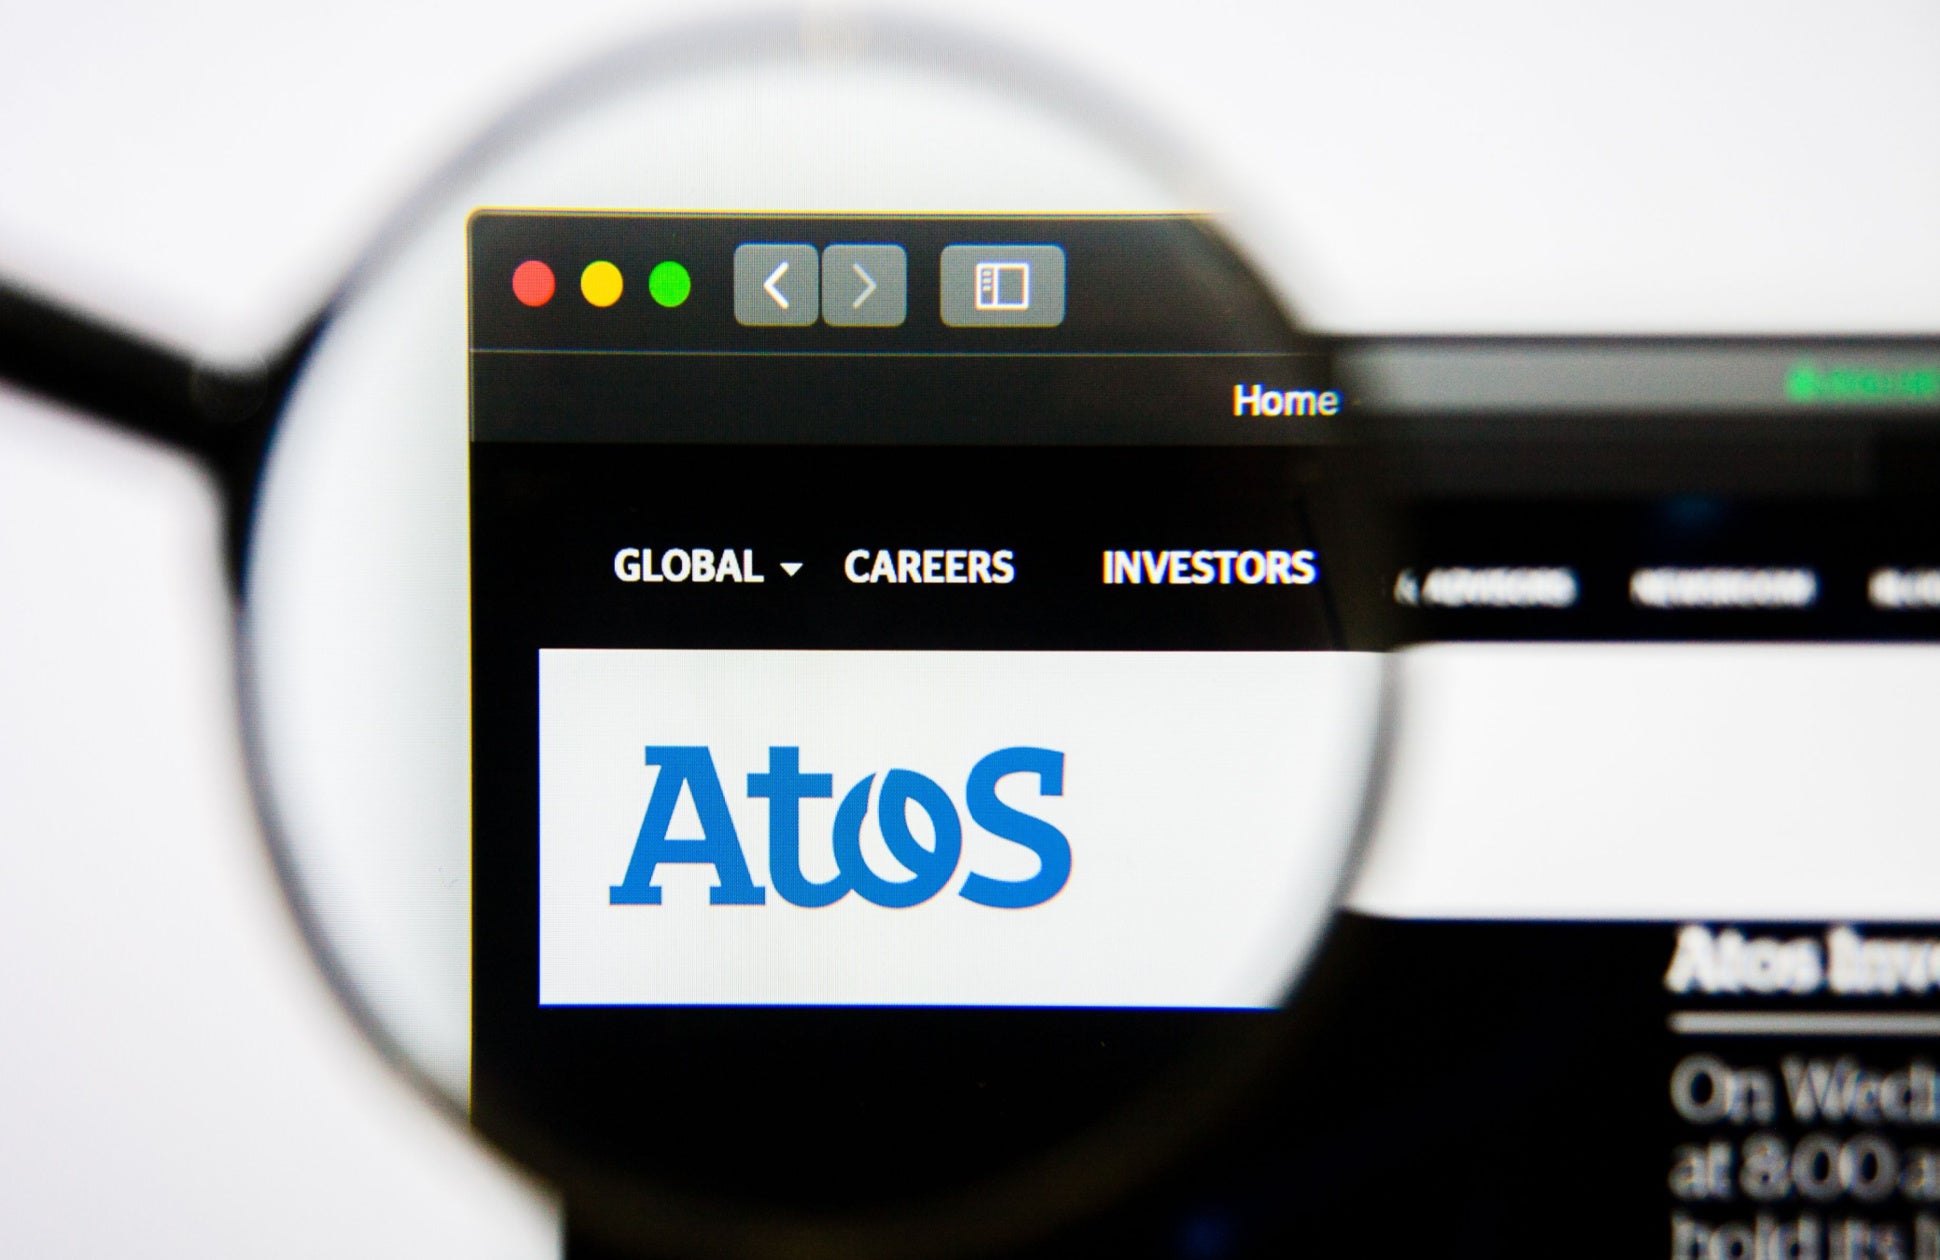 Atos announces restructure - but there is likely more to come